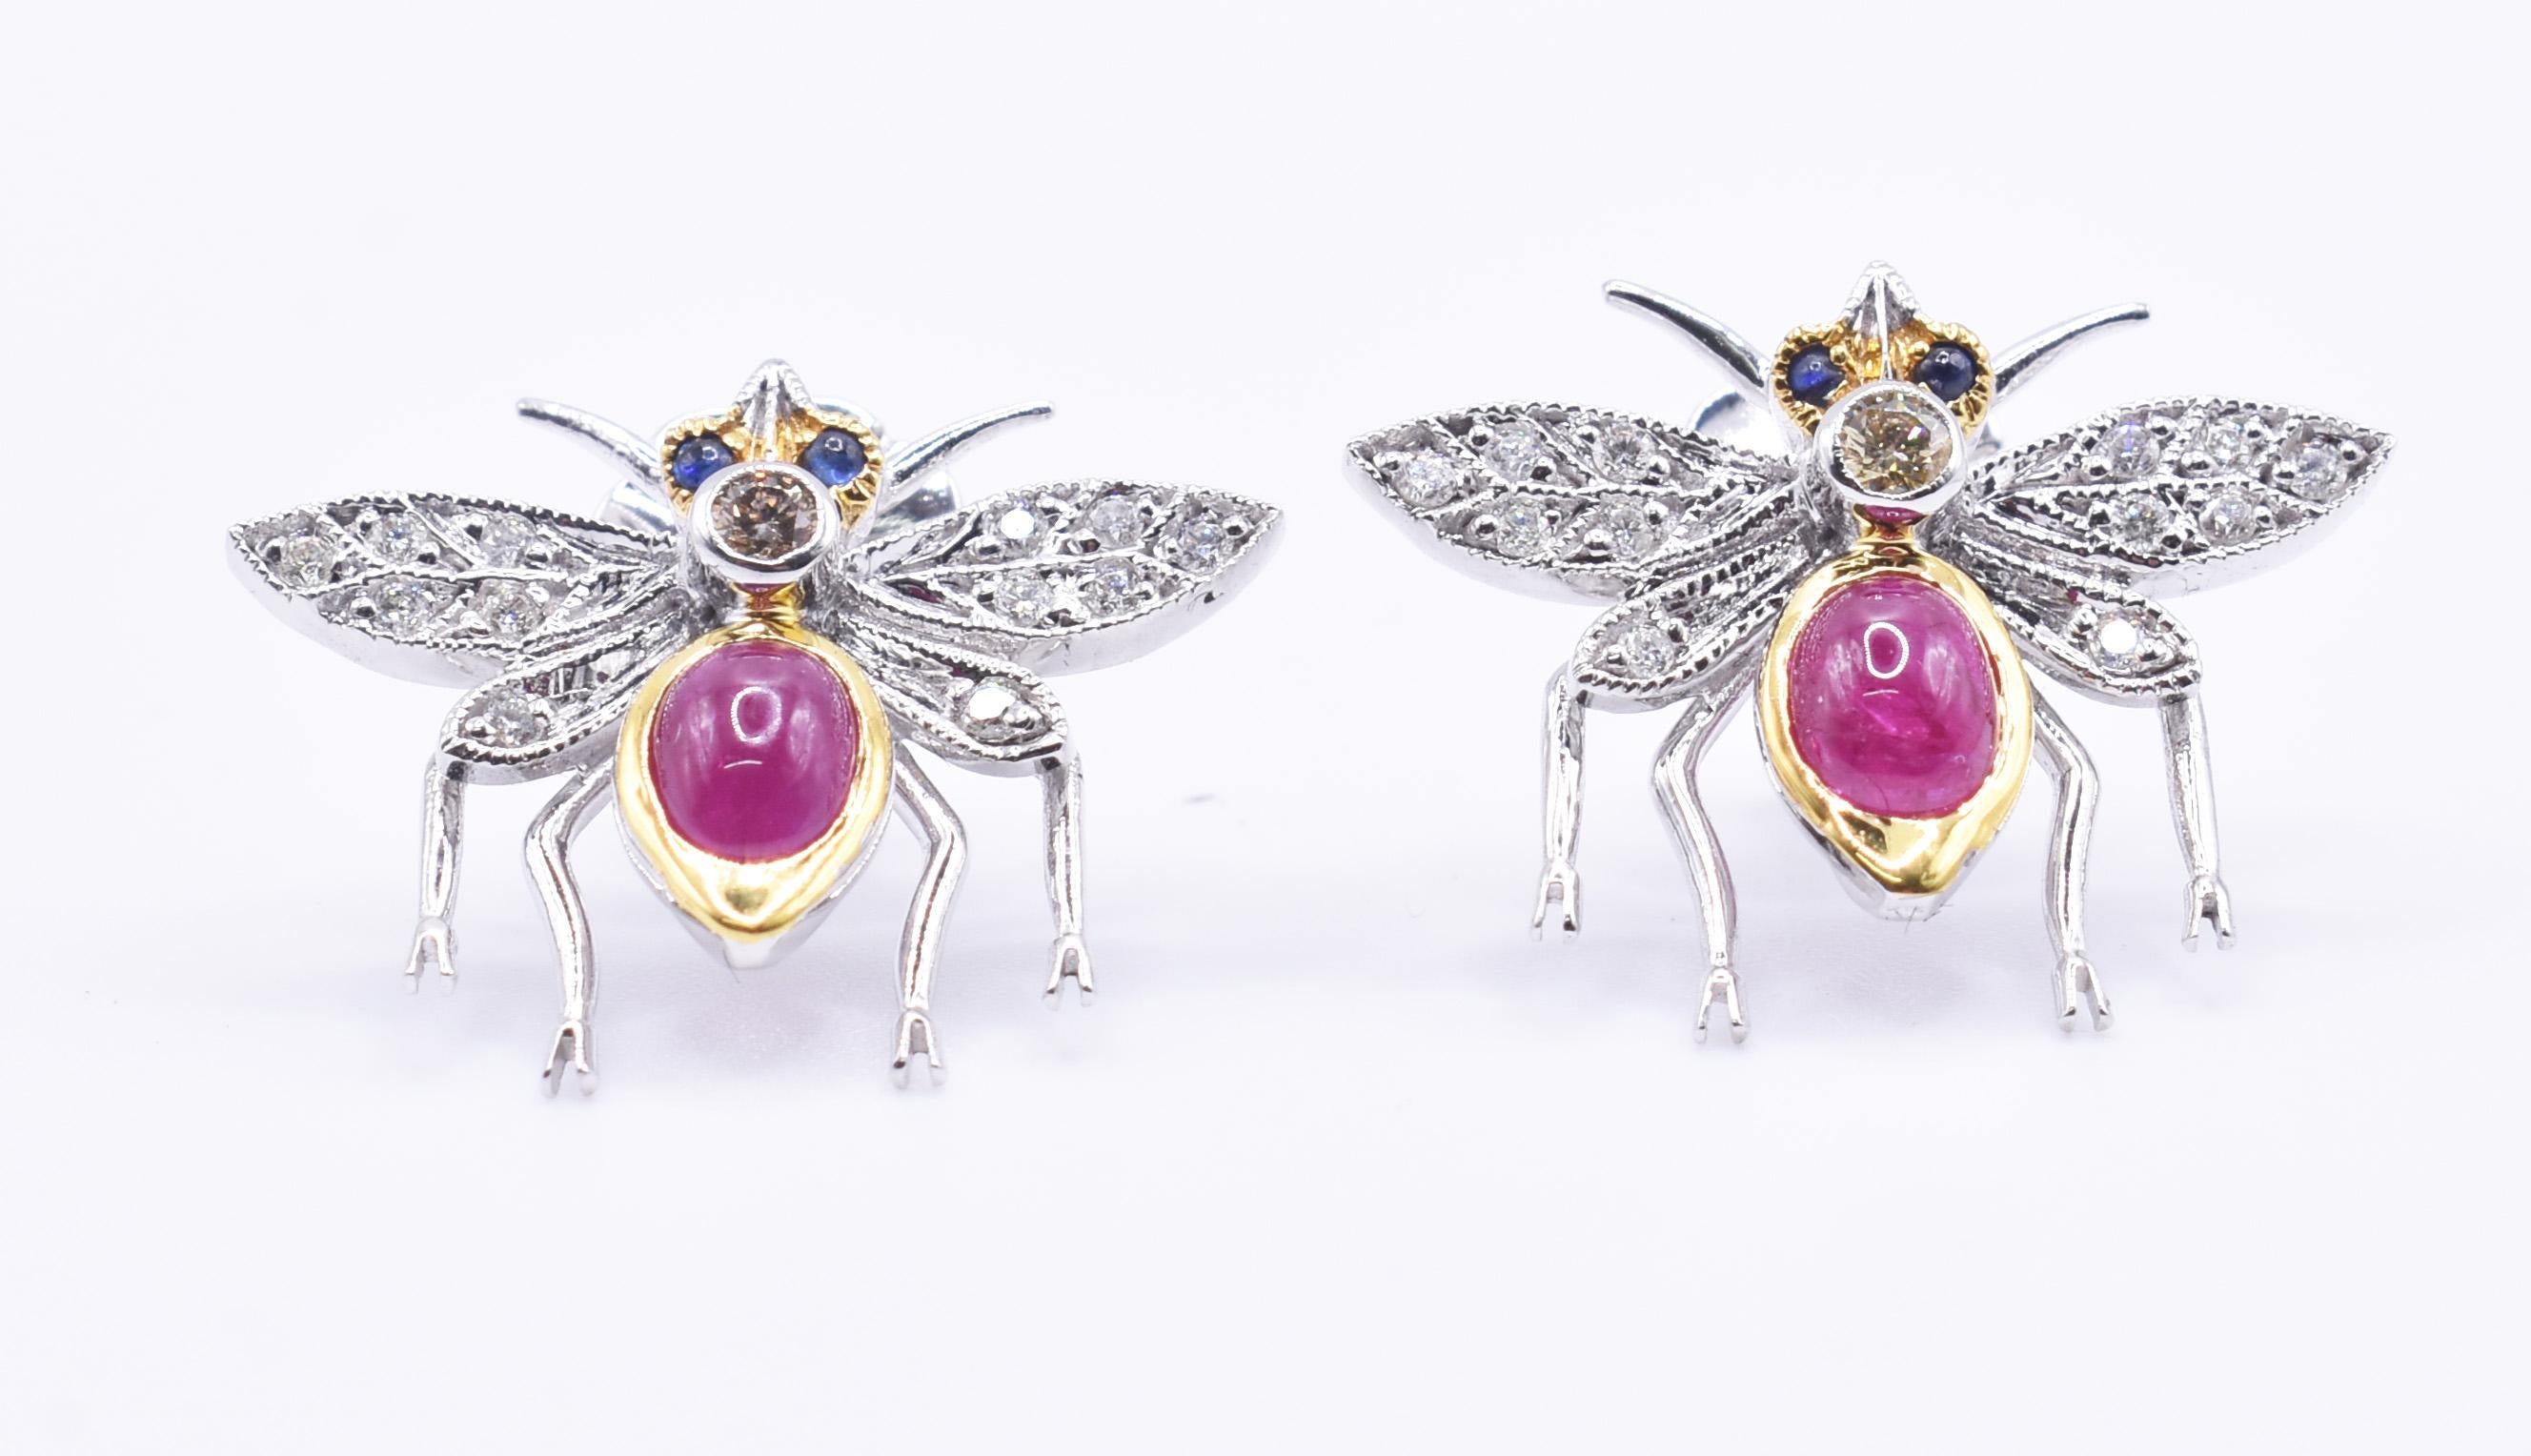 A sweet pair of 18k white and yellow hold ruby and diamond bug earrings, boasting 26 diamonds totalling 0.30cts, as well as superb cabochon Rubys. 

Metal: 18k White Gold
Total Carat Weight (Ruby): 1.25ct
Total Carat Weight (Diamond): 0.30ct